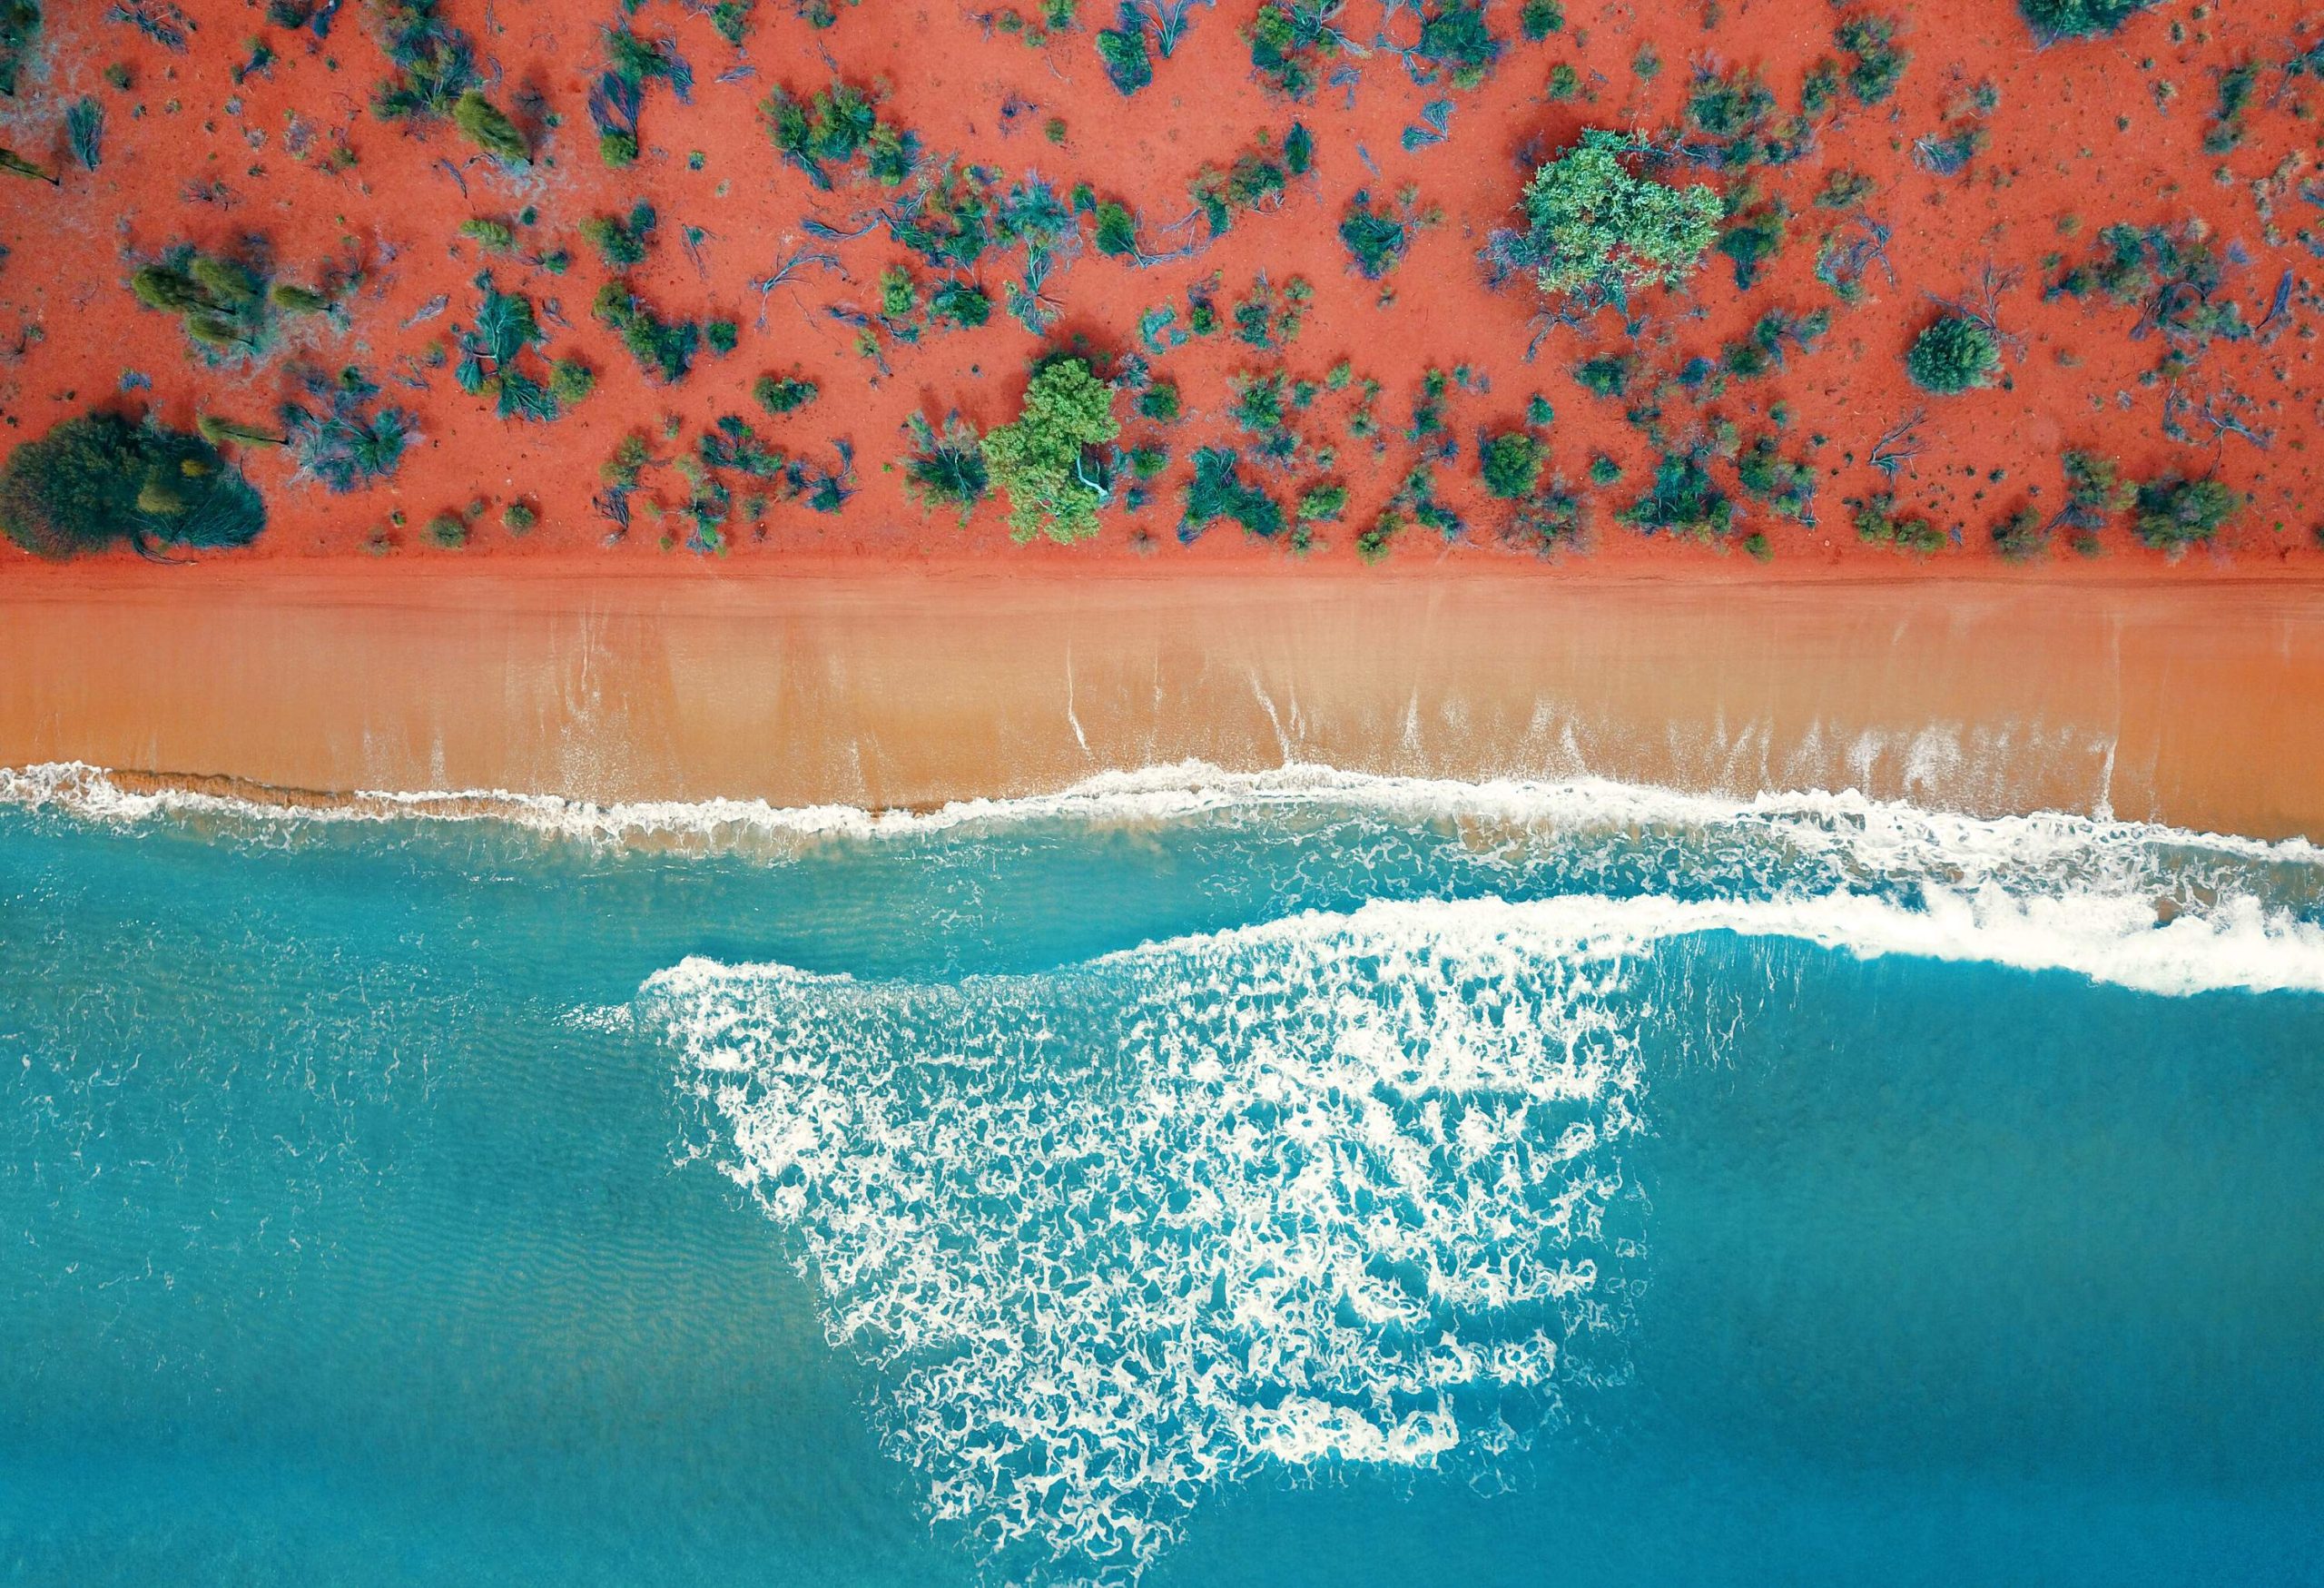 Top view of orangy sandy shore by the wavy turquoise sea.